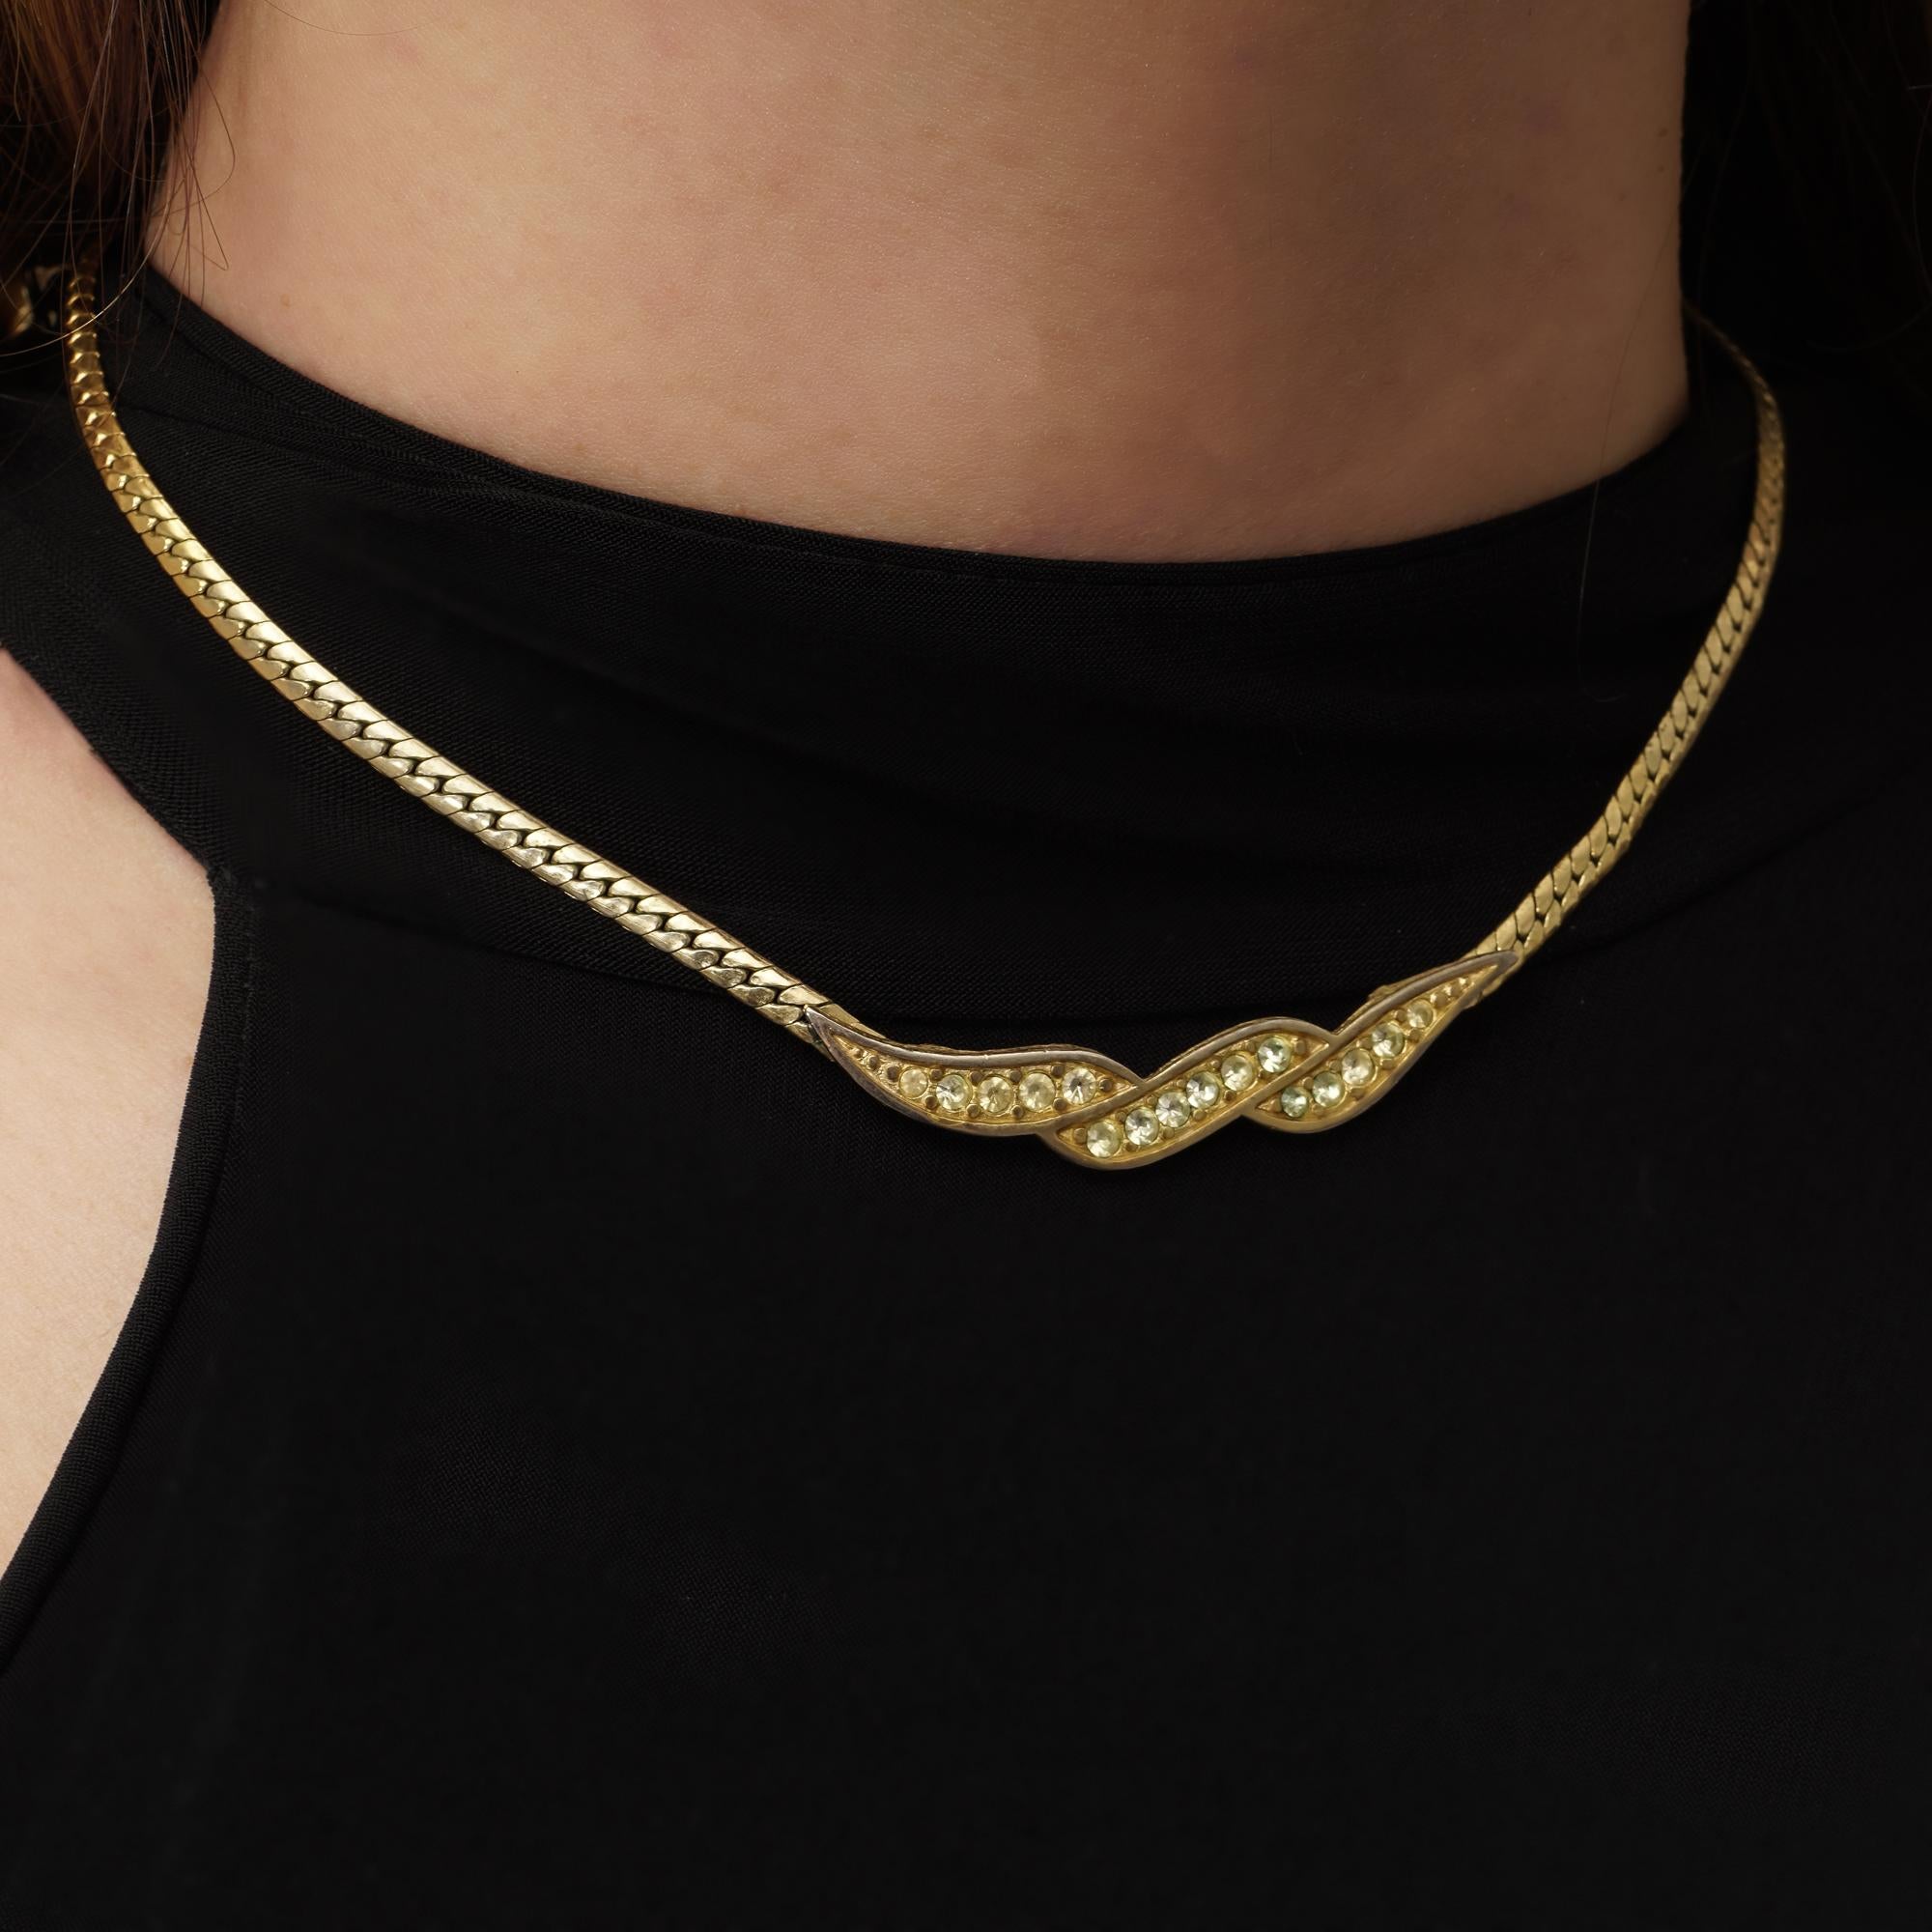 Transport yourself to the epitome of vintage glamour with this Vintage Givenchy yellow-tone necklace, crafted circa the 1990s, radiating the timeless allure and sophistication synonymous with the Givenchy brand.

Exquisitely designed and expertly